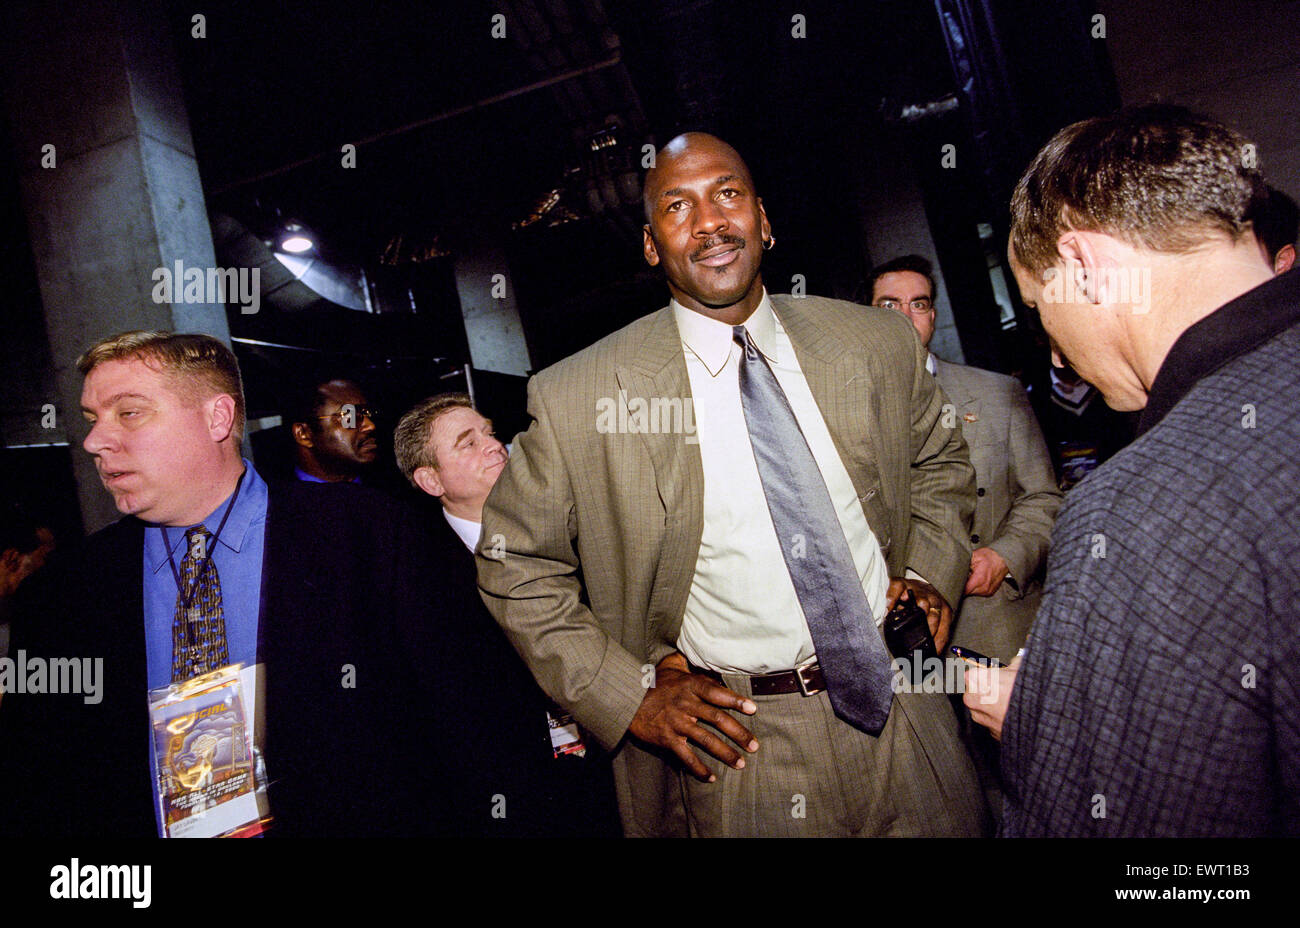 OAKLAND, CA – FEBRUARY 13: Michael Jordan at the NBA All-Star Game held in Oakland, California on February 13, 2000. Stock Photo